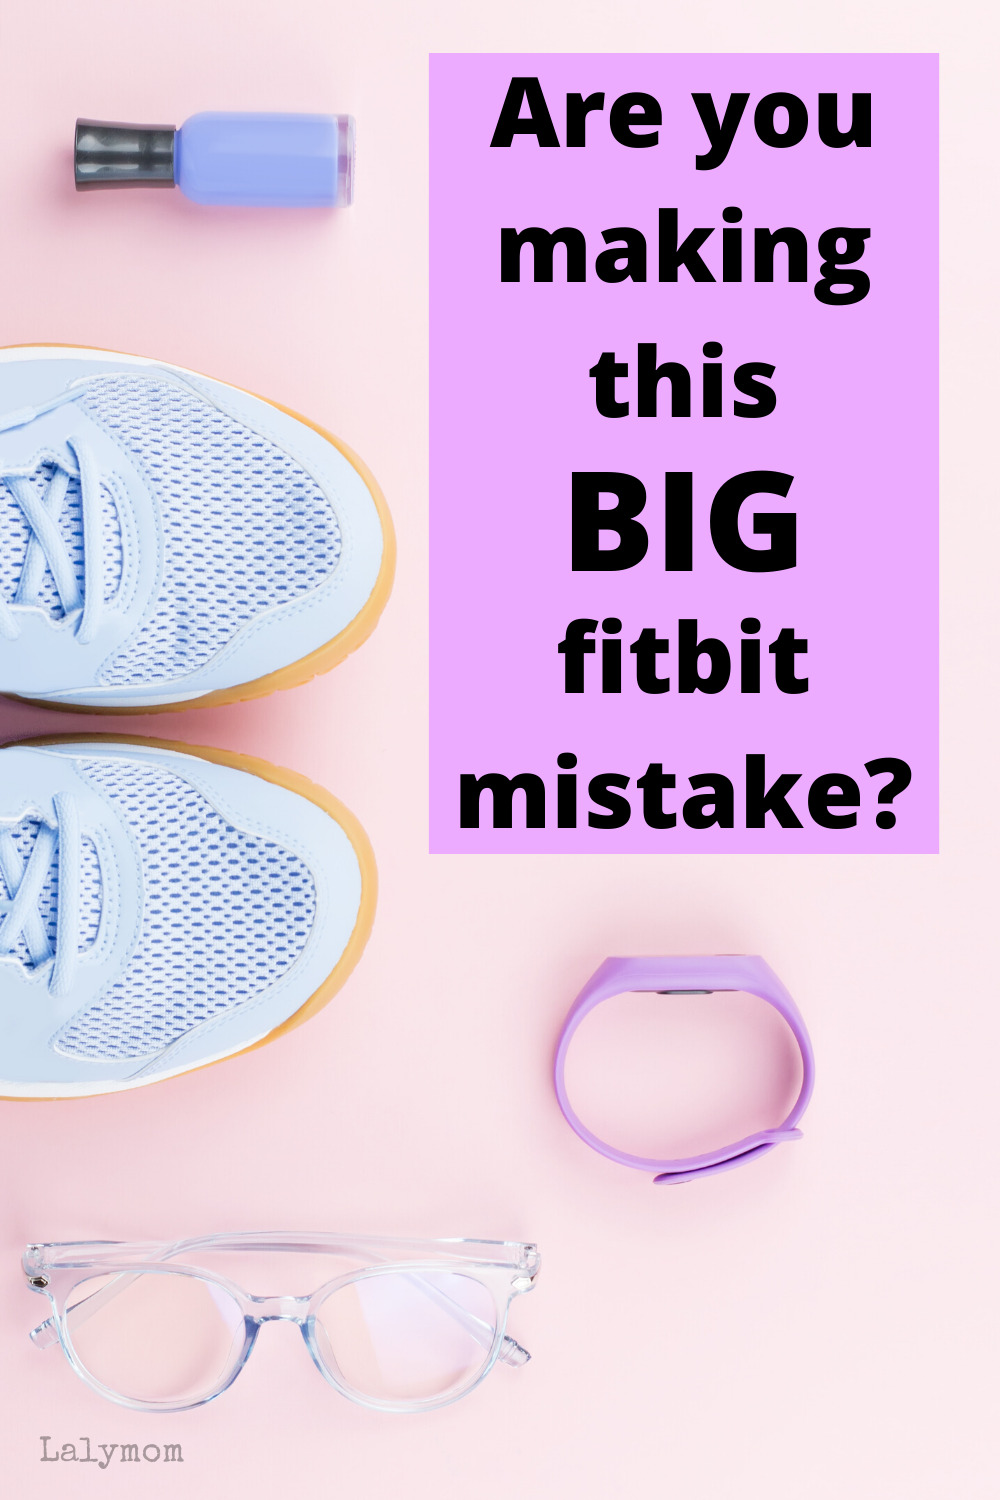 Got a Fitbit (or other fitness tracker?) Check to see if you are you making this BIG fitbit weight loss mistake